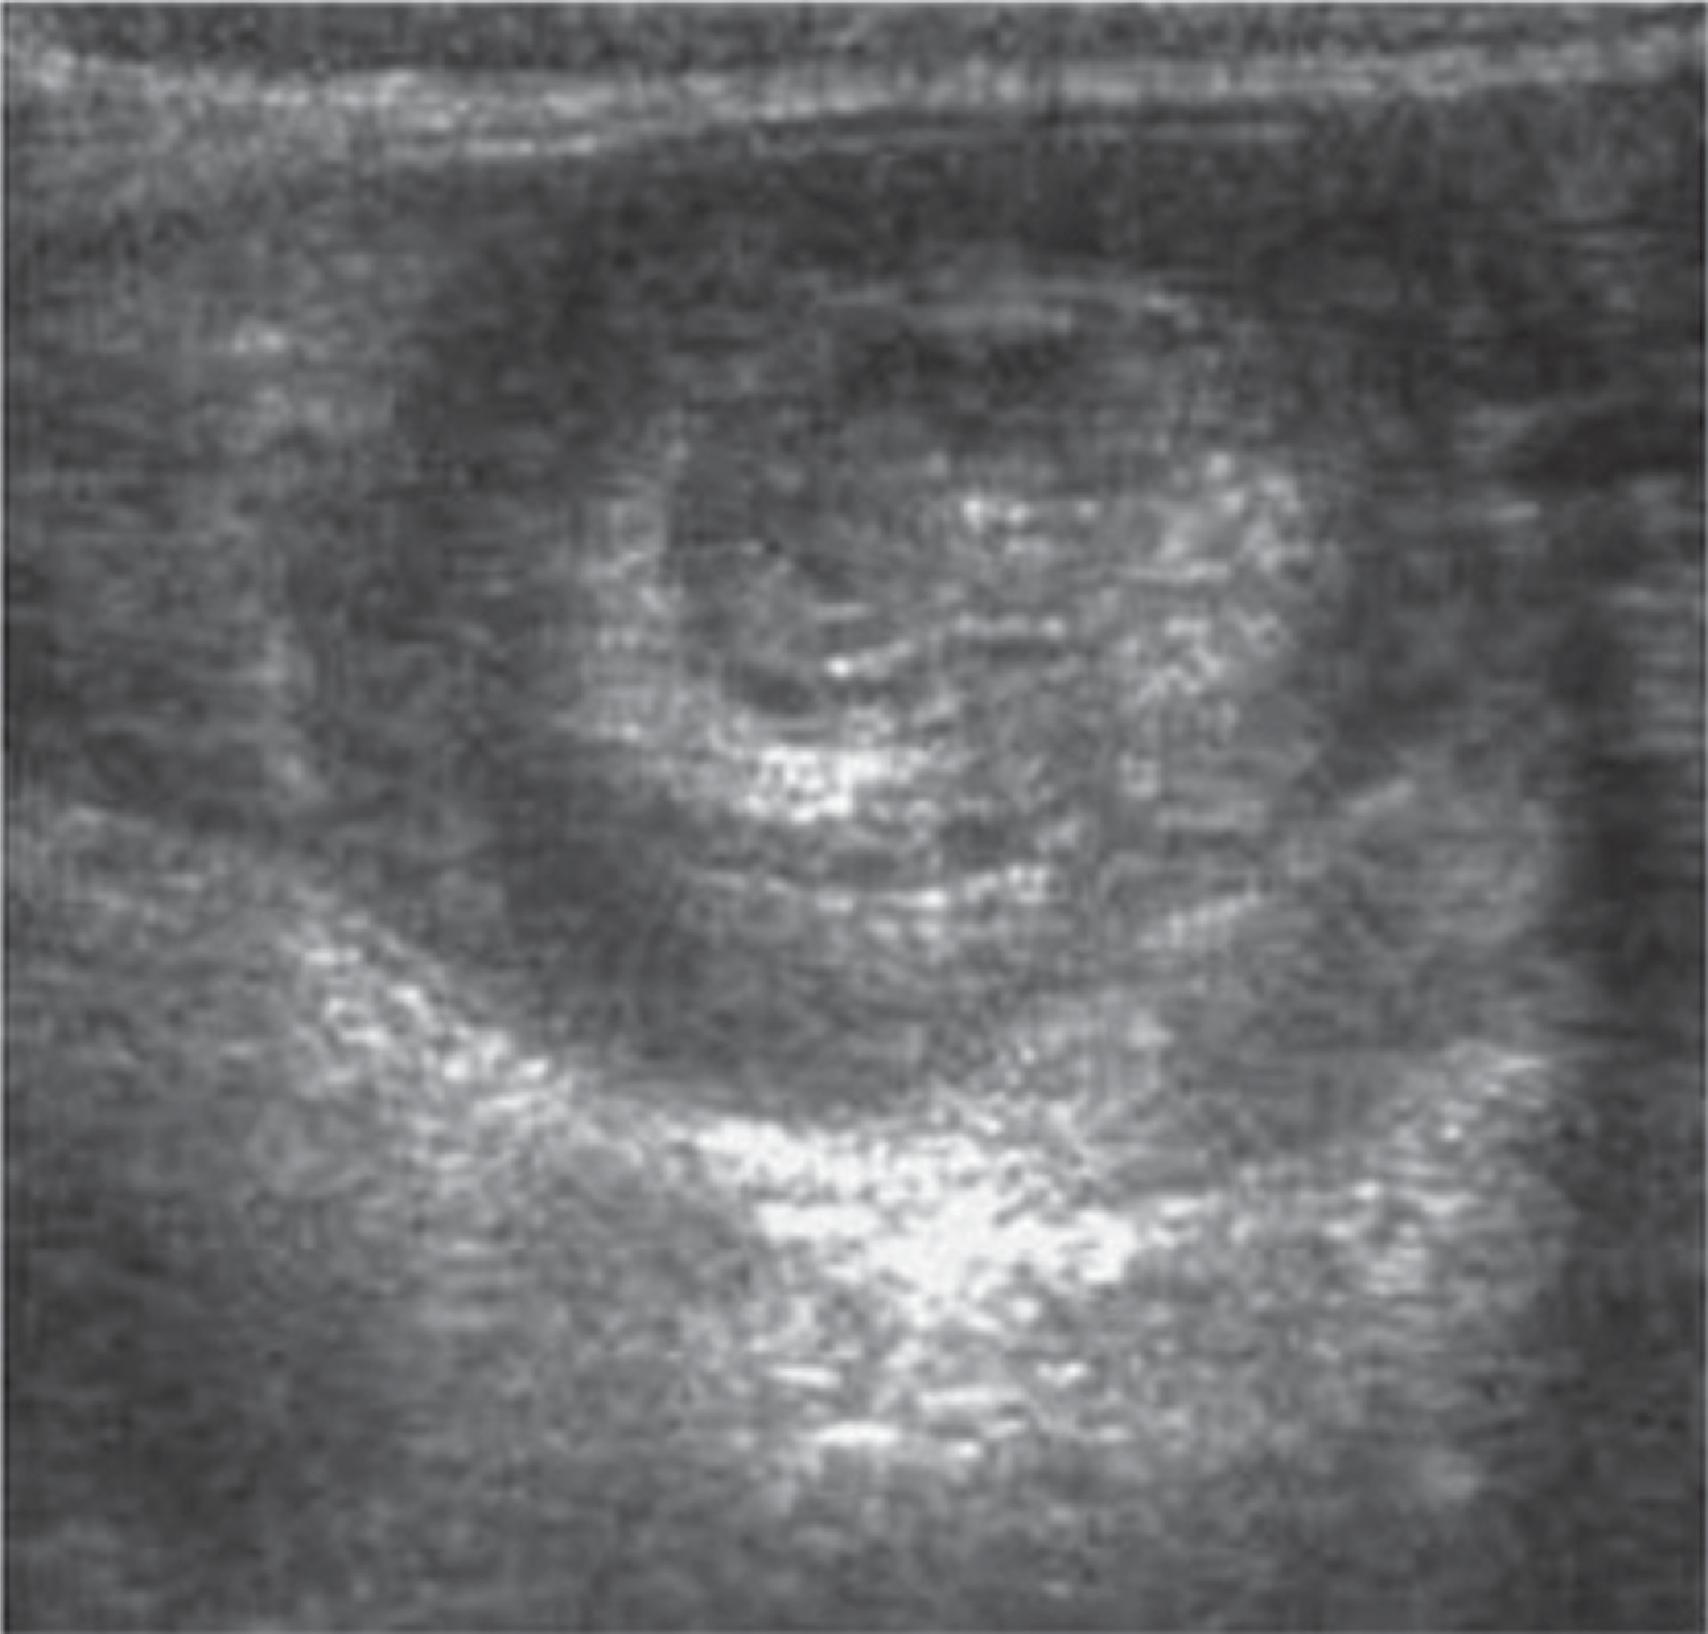 FIG. 6, Abdominal ultrasound image in pediatric patient demonstrating a target sign consistent with ileocolic intussusception.